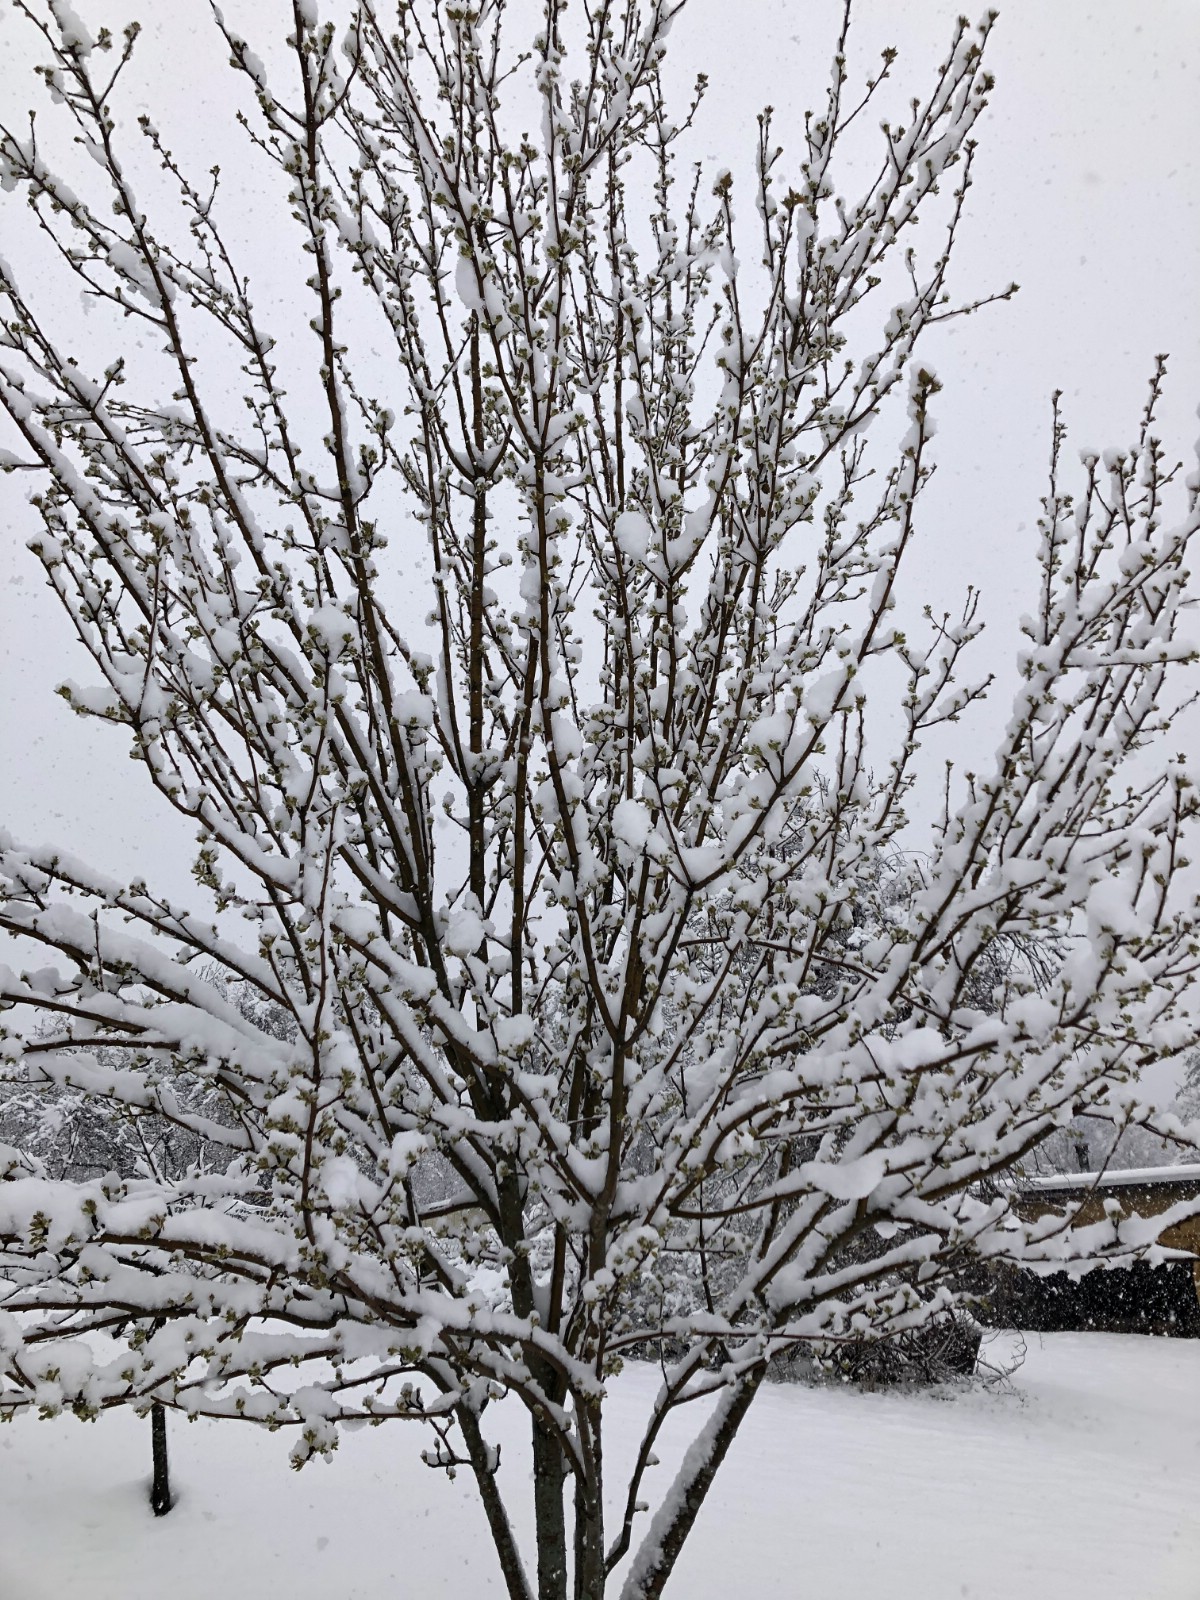 fruit tree covered in spring snow